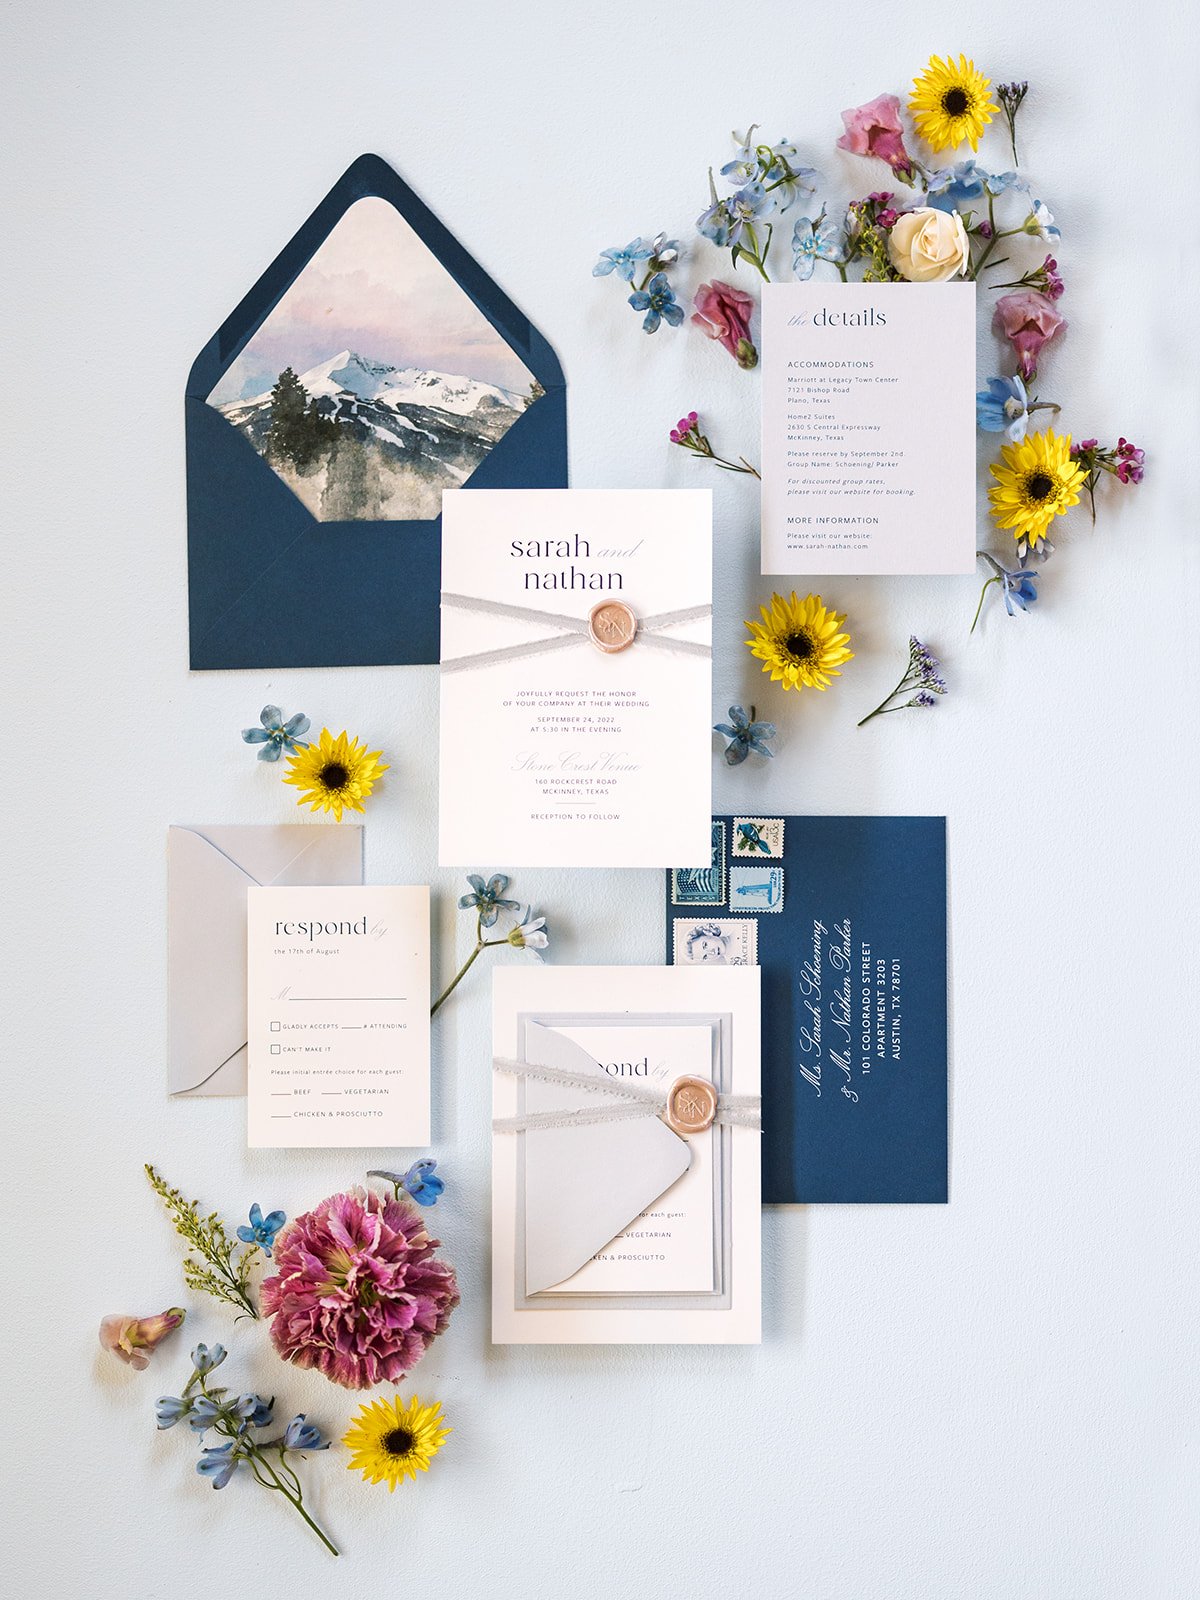 Montana wedding invitation with wildflower flowers by Montana wedding planner Shannon rose events